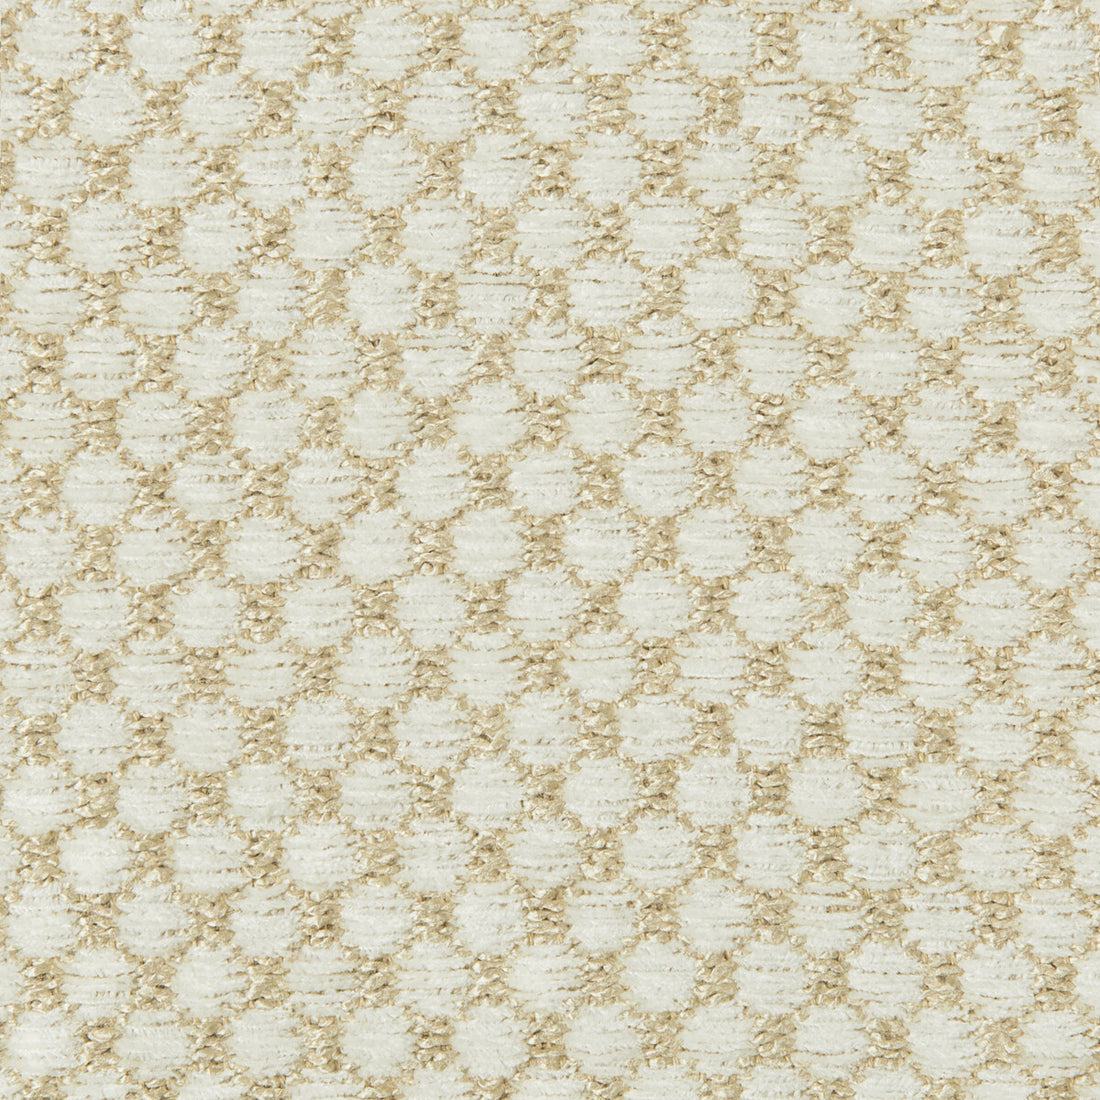 Ecrins Texture fabric in pearl color - pattern 8019147.1.0 - by Brunschwig &amp; Fils in the Chambery Textures II collection